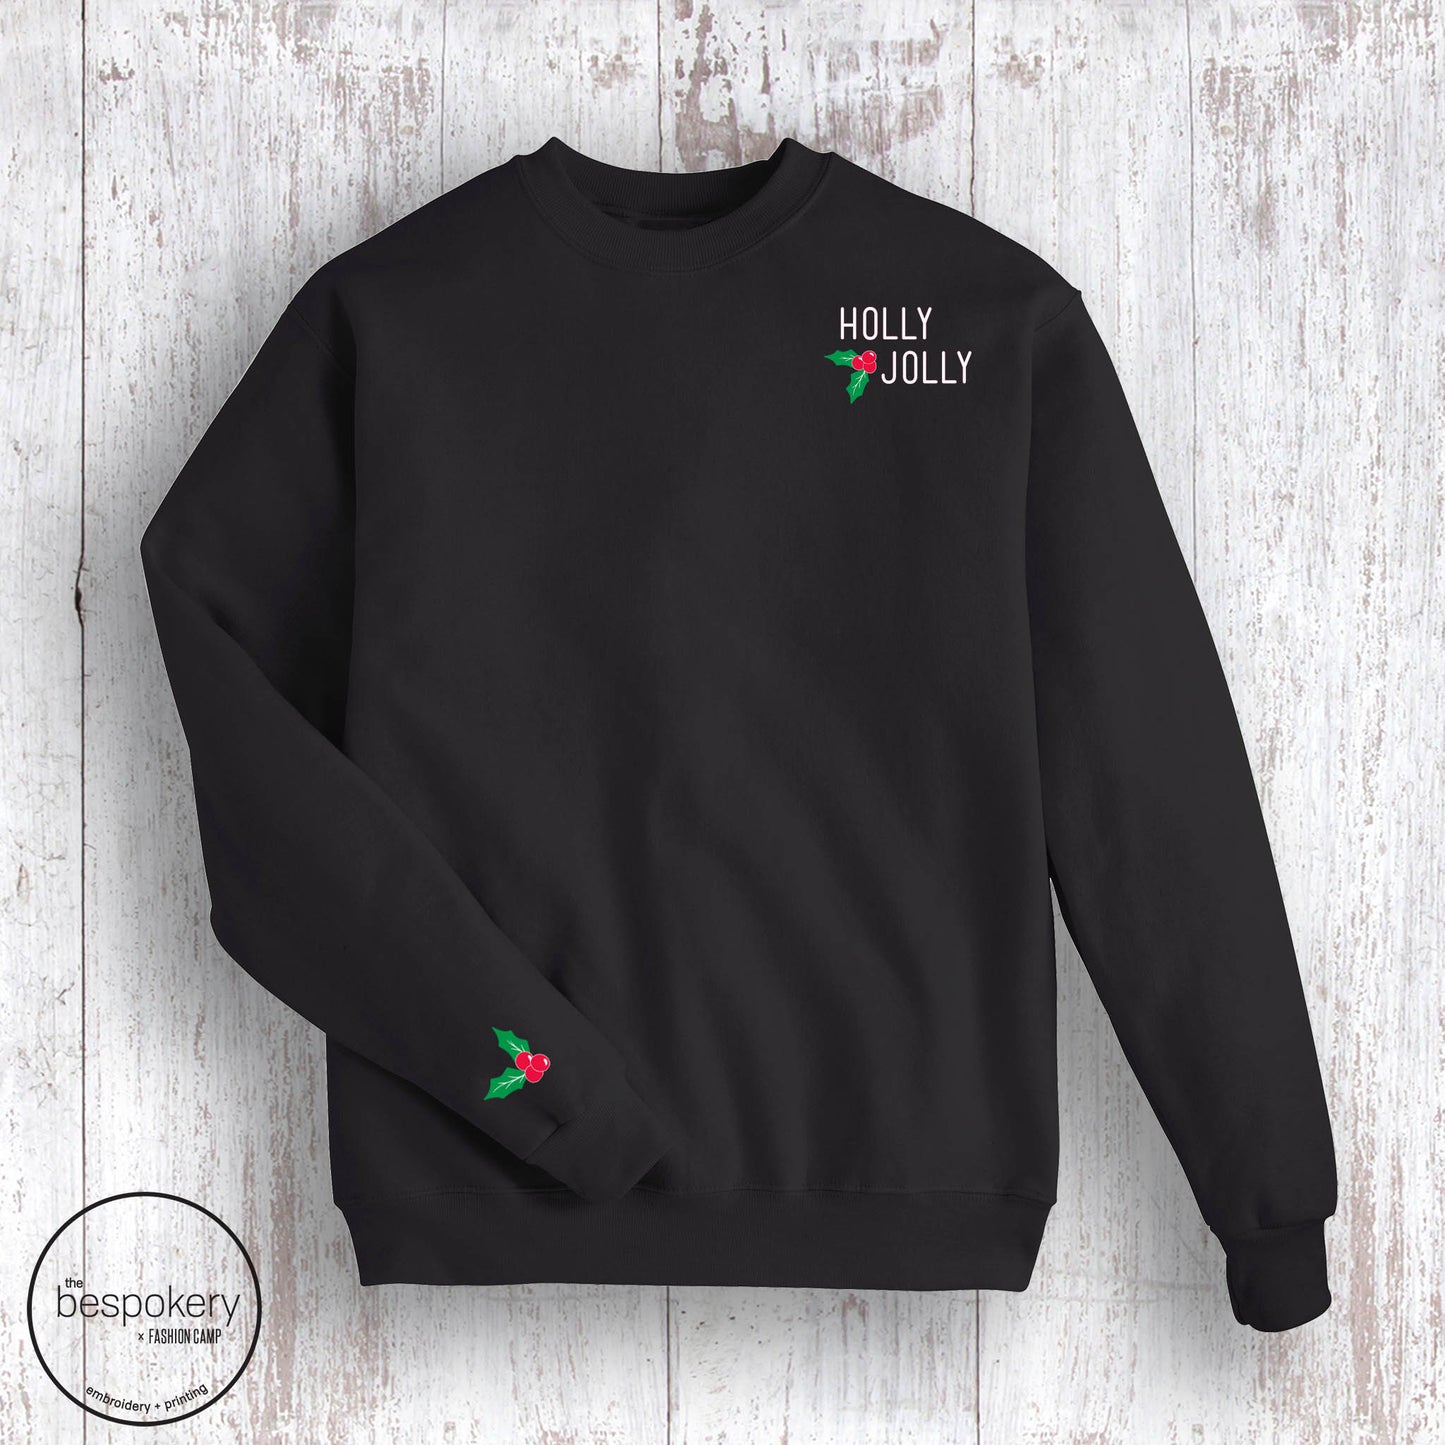 Holly Jolly Sweatshirt- Black (Adult Only)